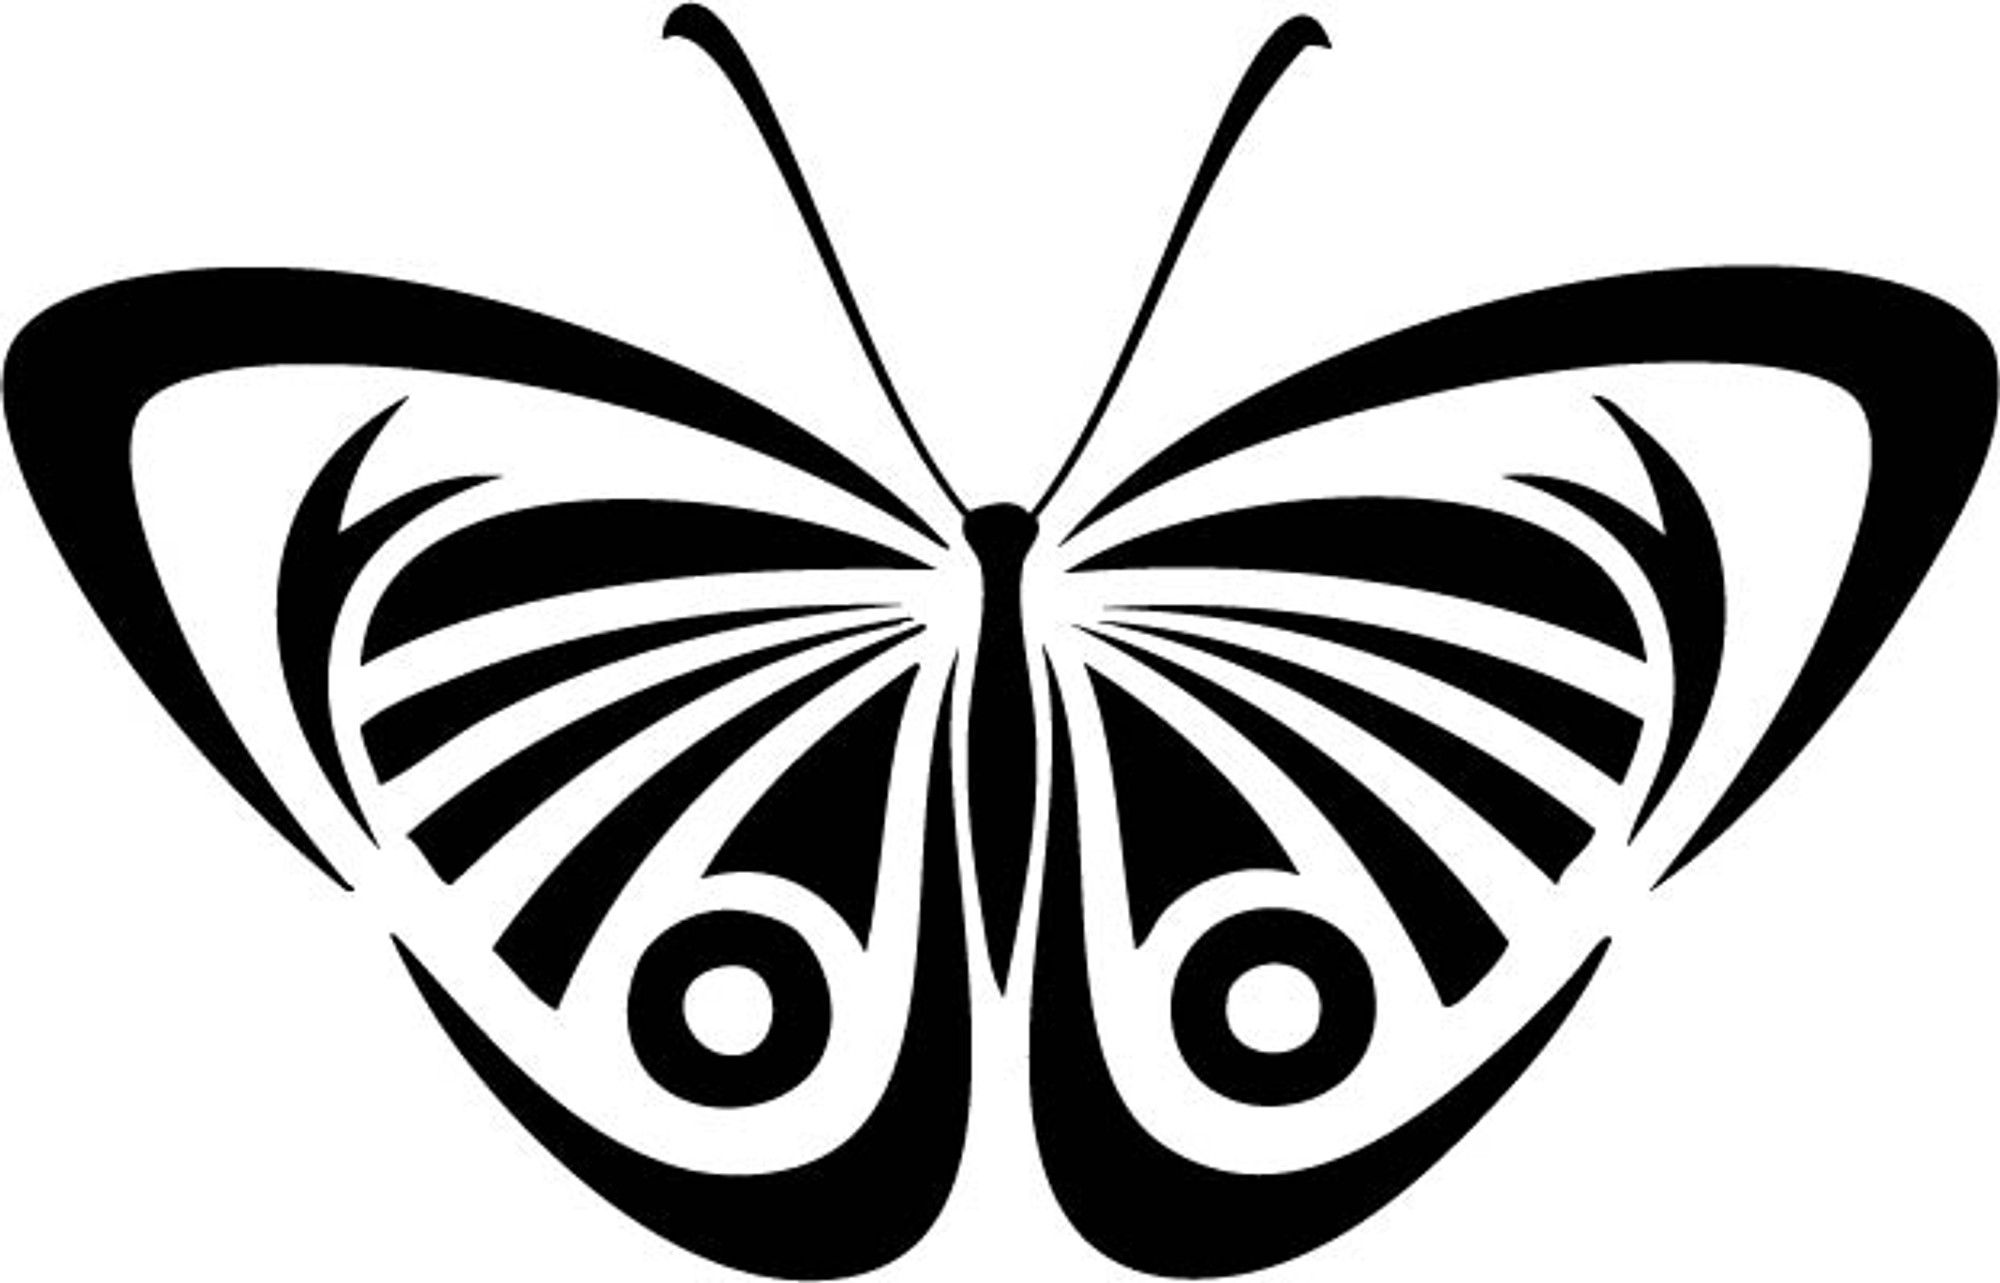 Download Insect Car Decals - Car Stickers | Butterfly Car Decal 13 | AnyDecals.com